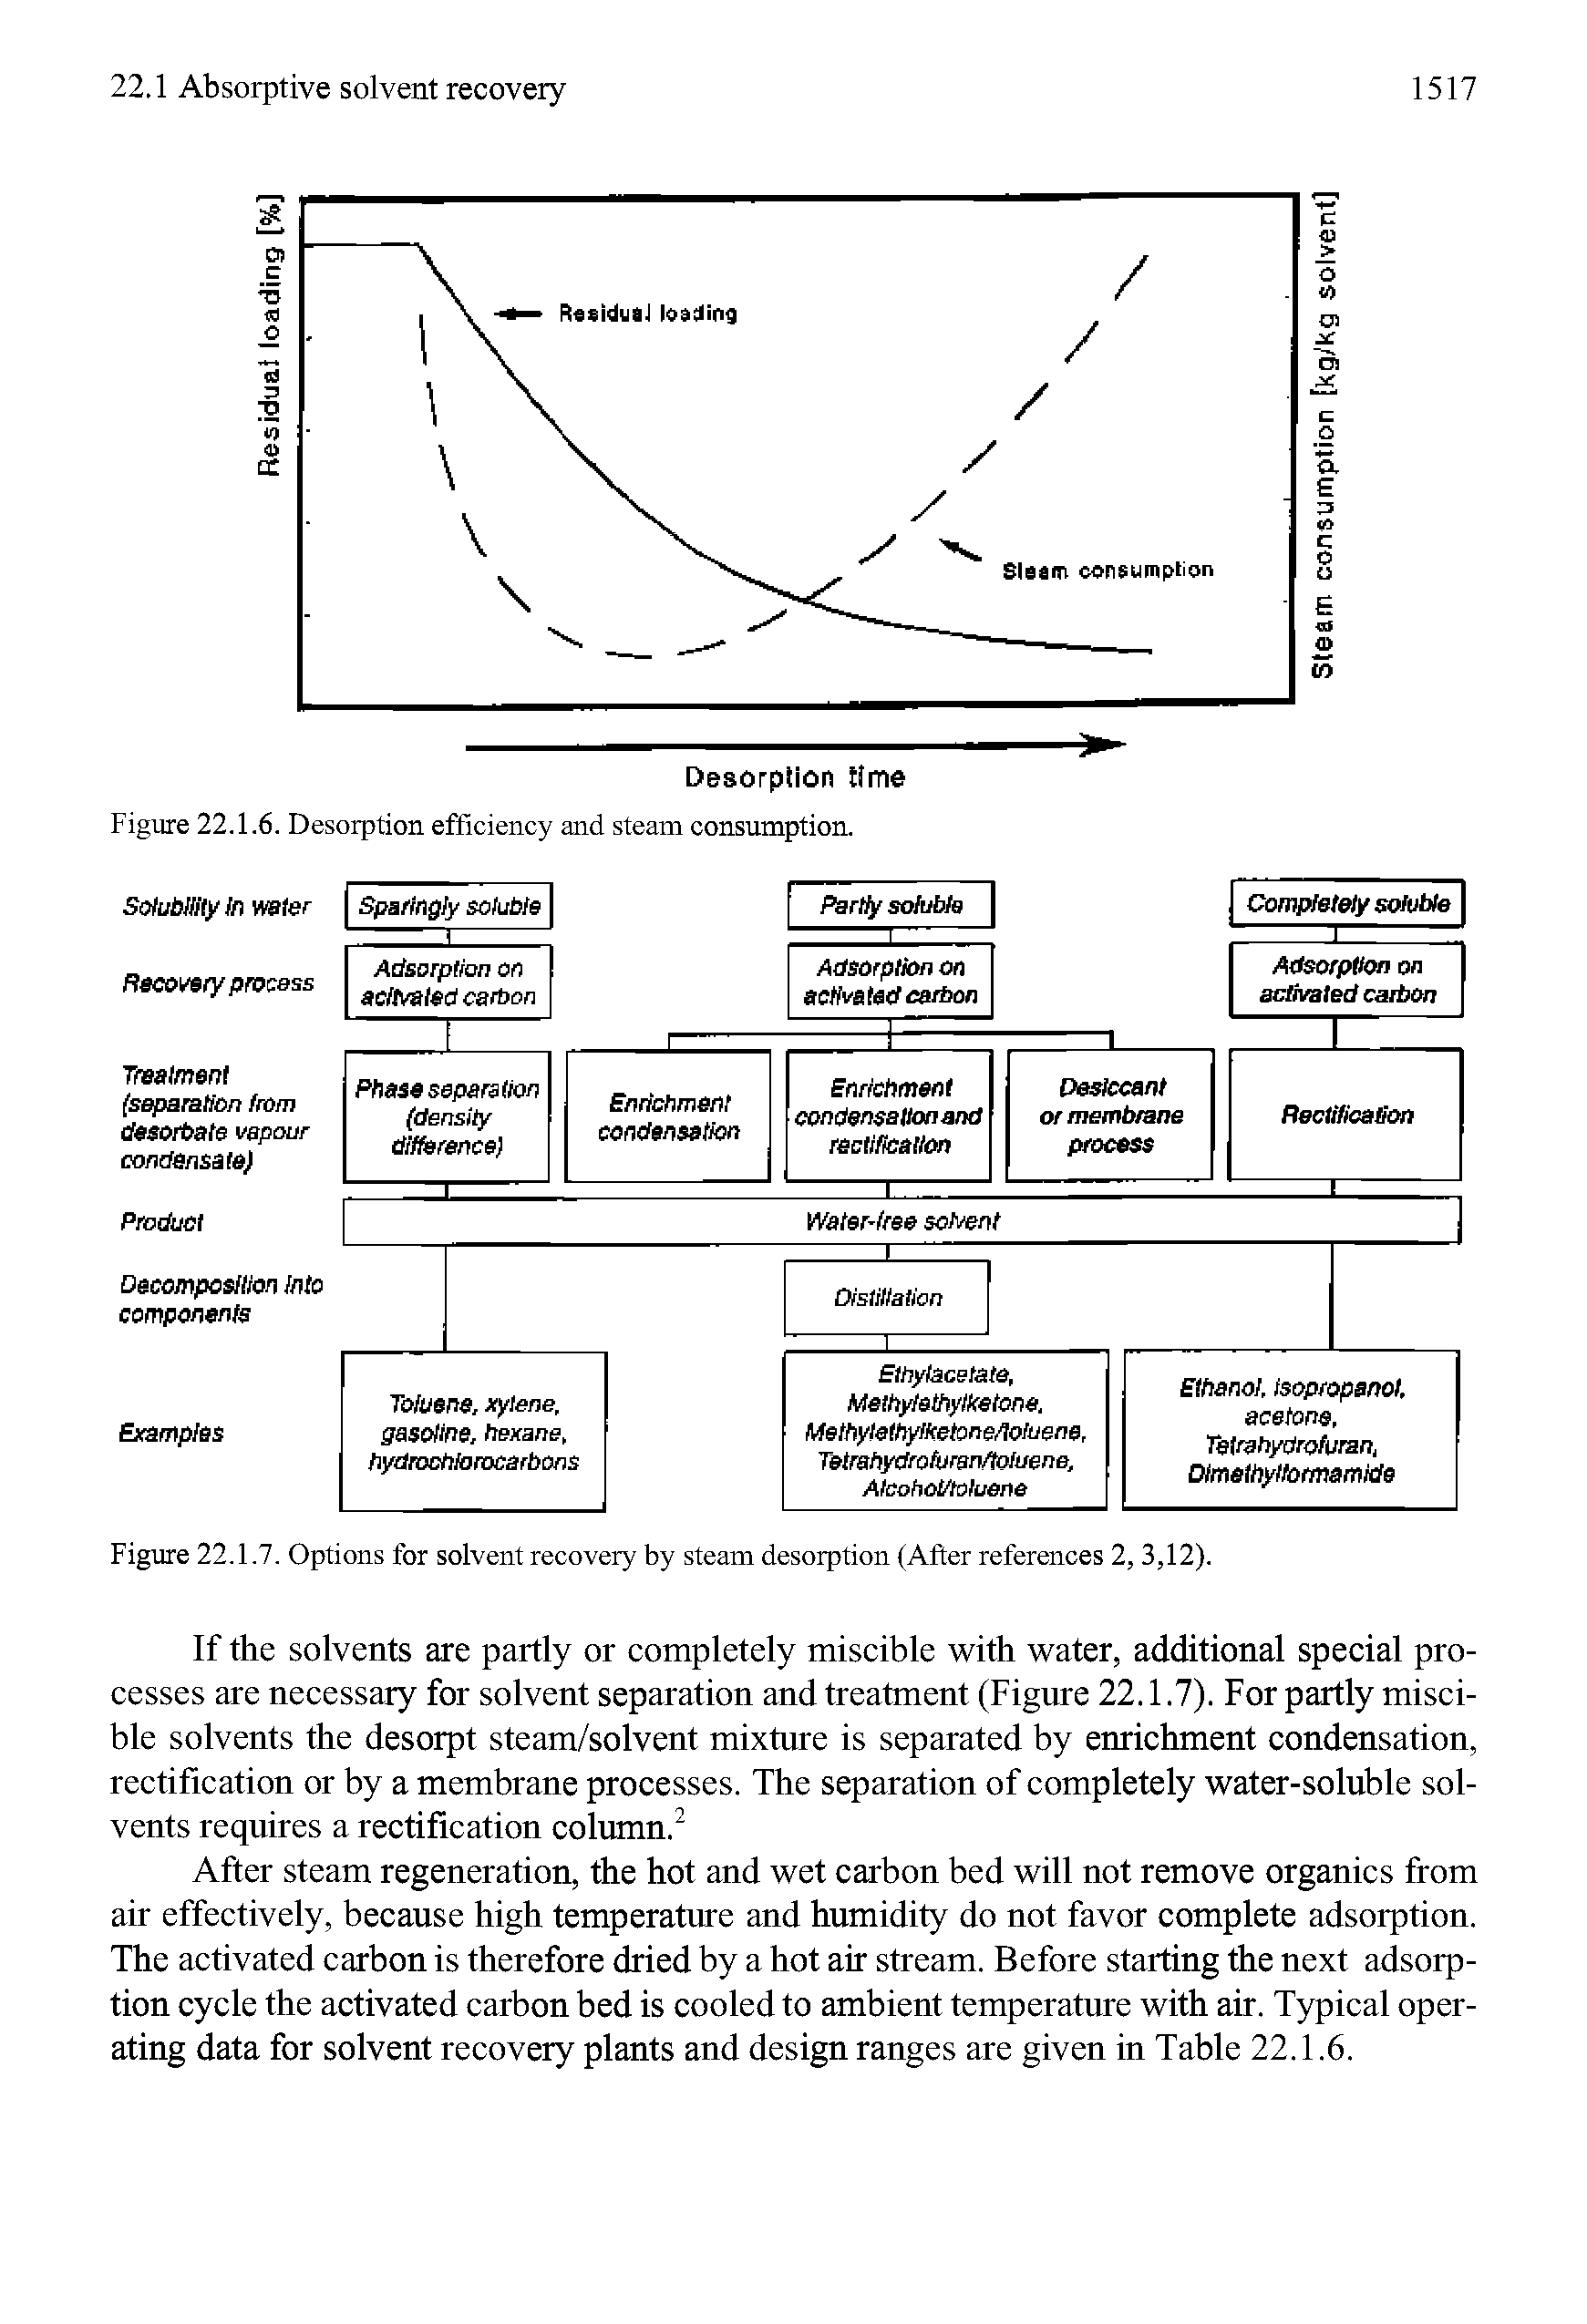 Figure 22.1.7. Options for solvent recovery by steam desorption (After references 2,3,12).